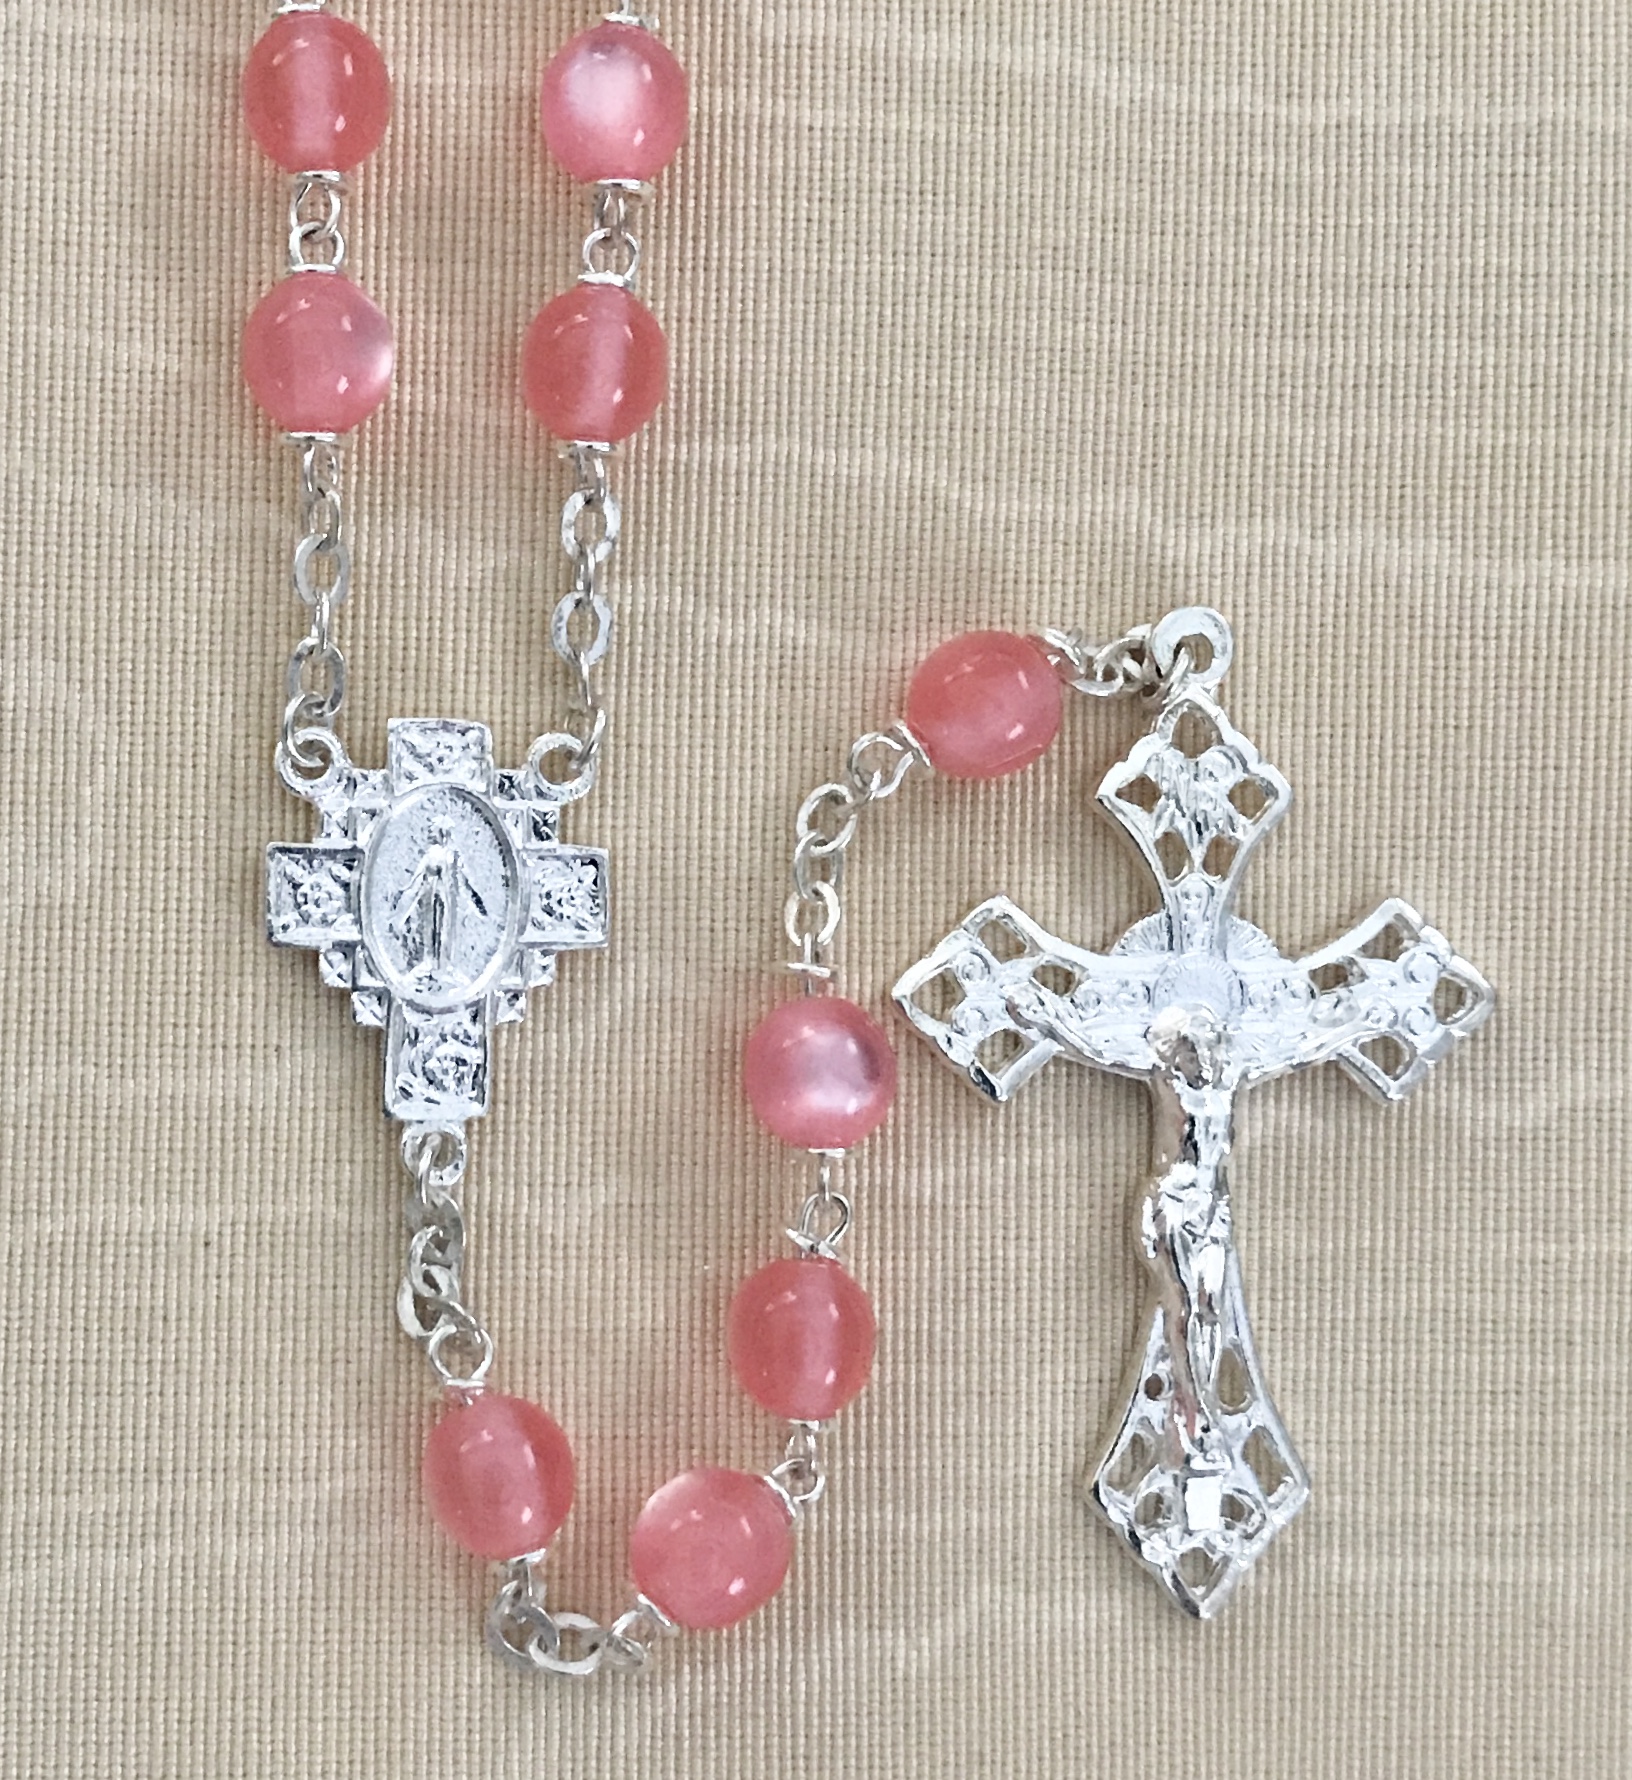 7mm PINK PEARL LOC-LINK ROSARY WITH STERLING SILVER PLATED CRUCIFIX AND CENTER GIFT BOXED